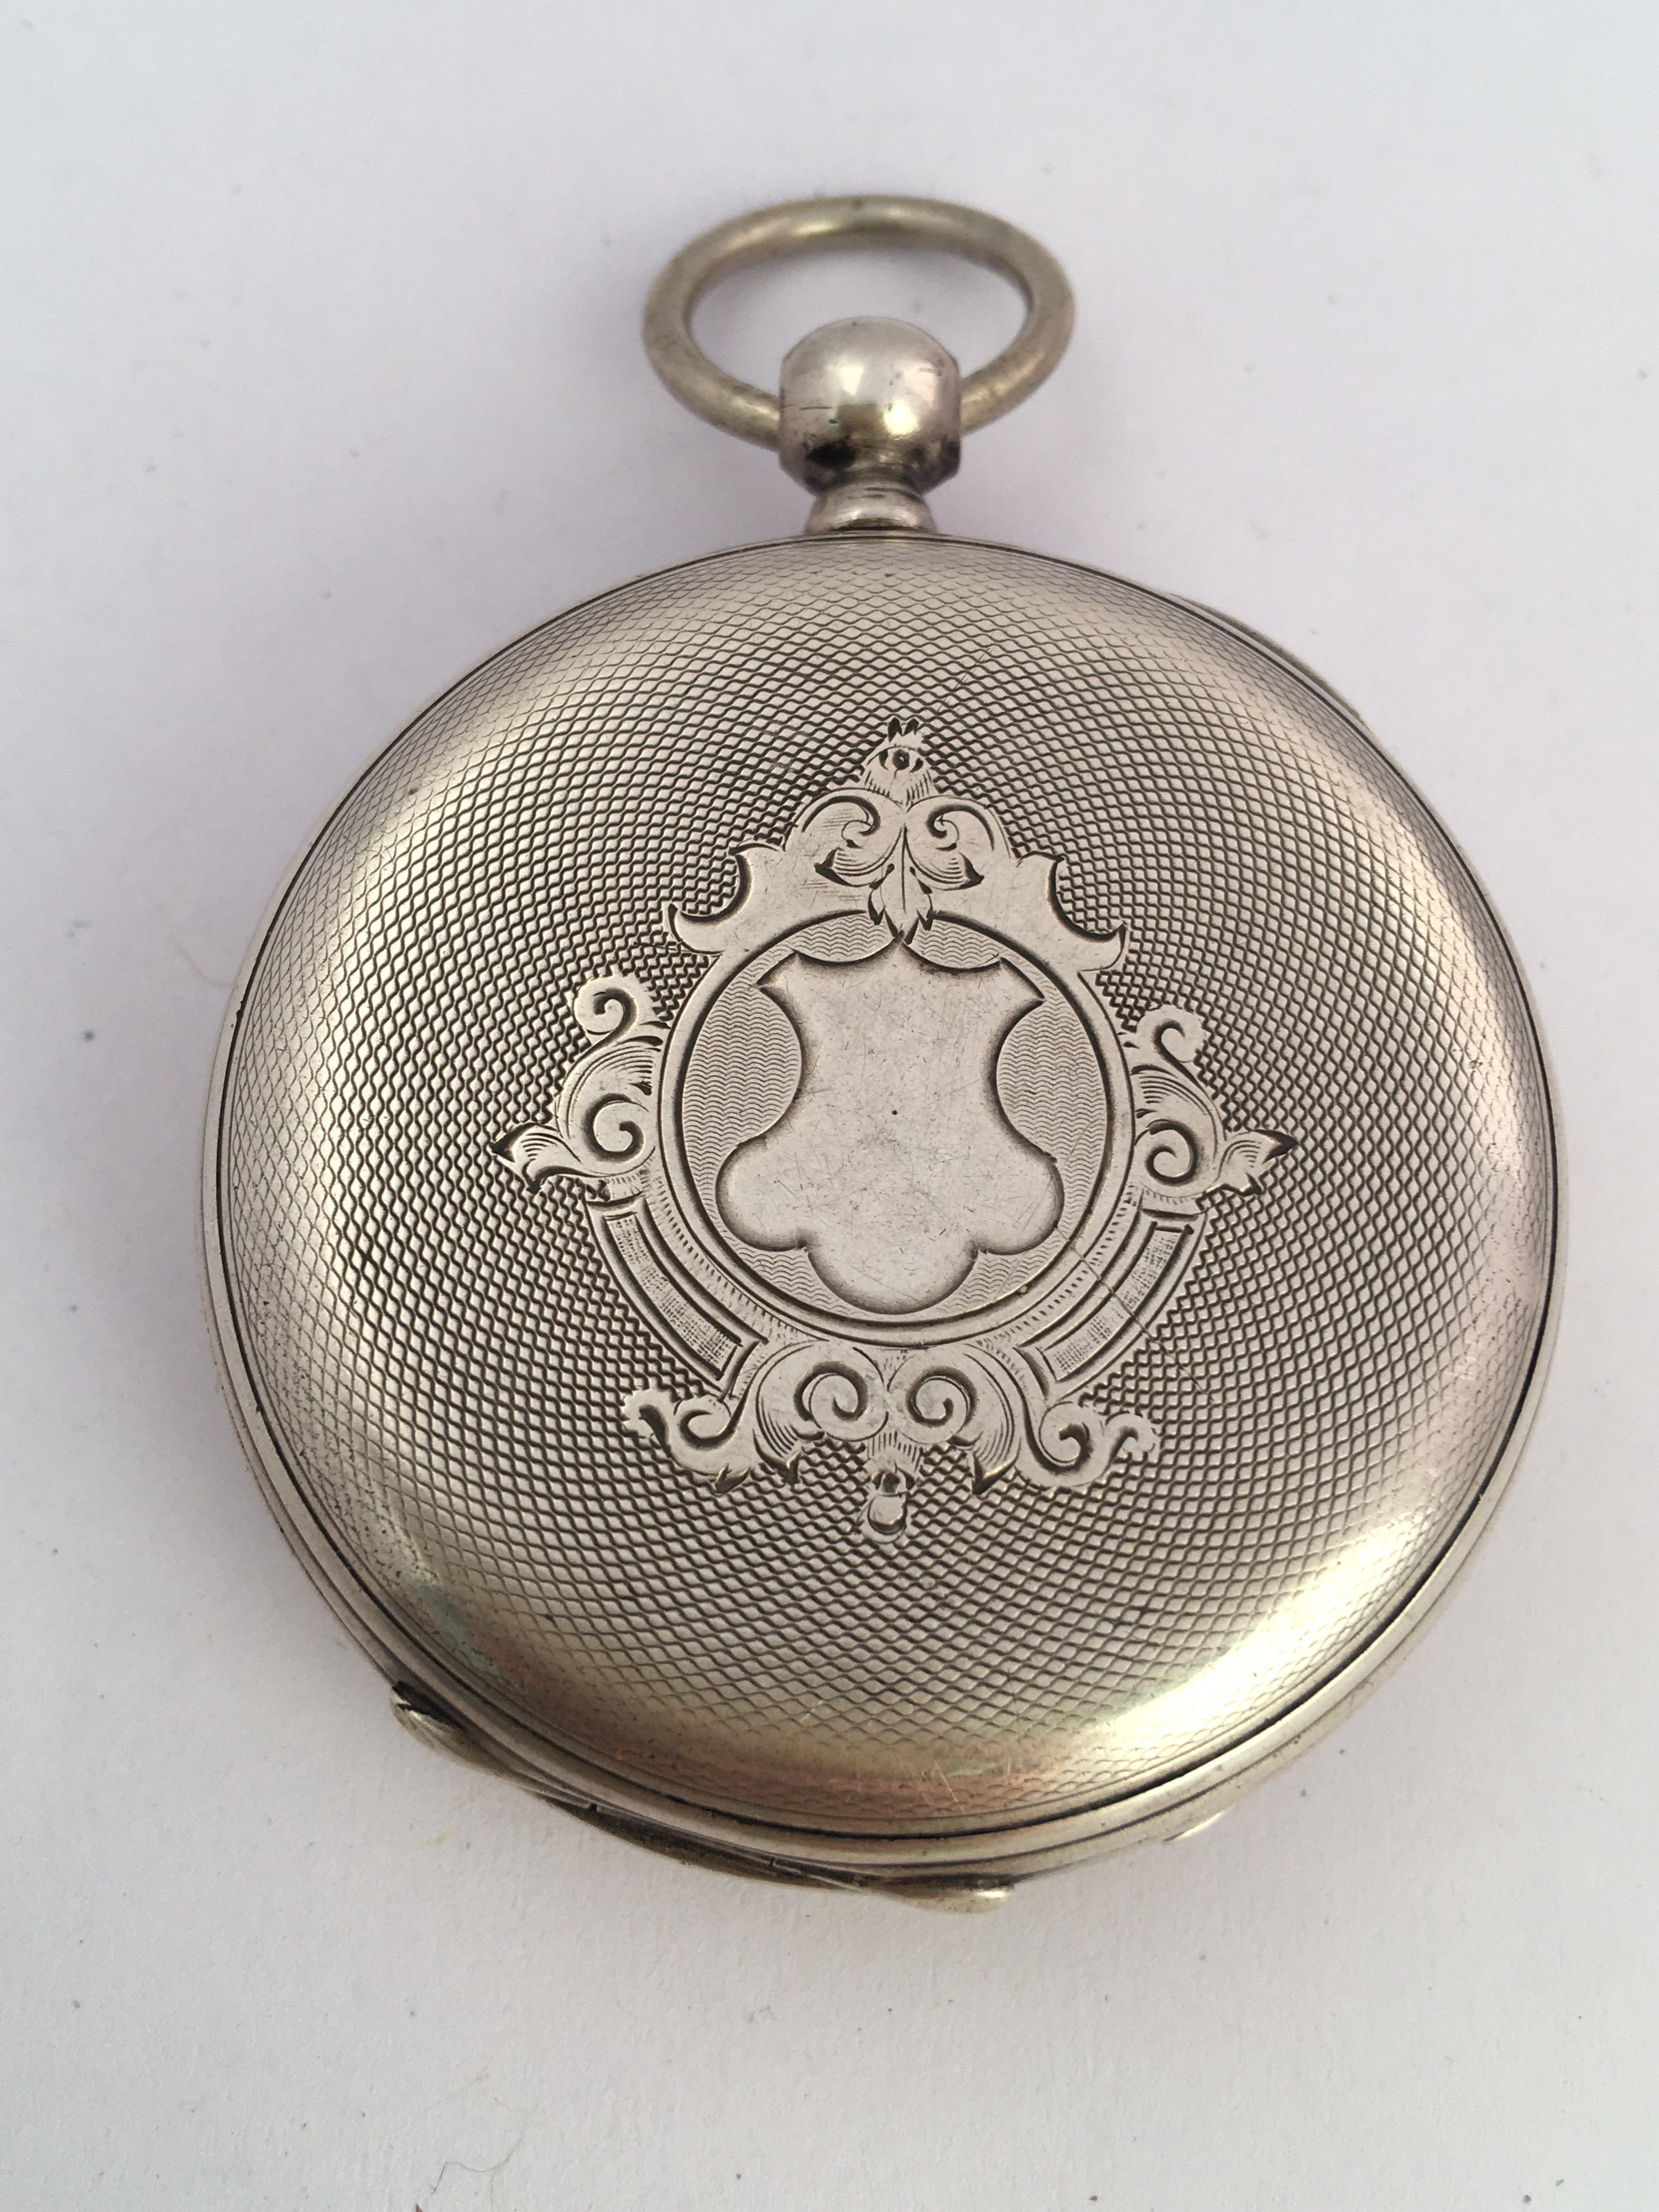 This beautiful antique 48mm diameter hand winding silver pocket watch is in good working condition and it is running well. Visible signs of ageing and wear with small light marks on the glass and on the watch case. A tiny chipped on the edge of the